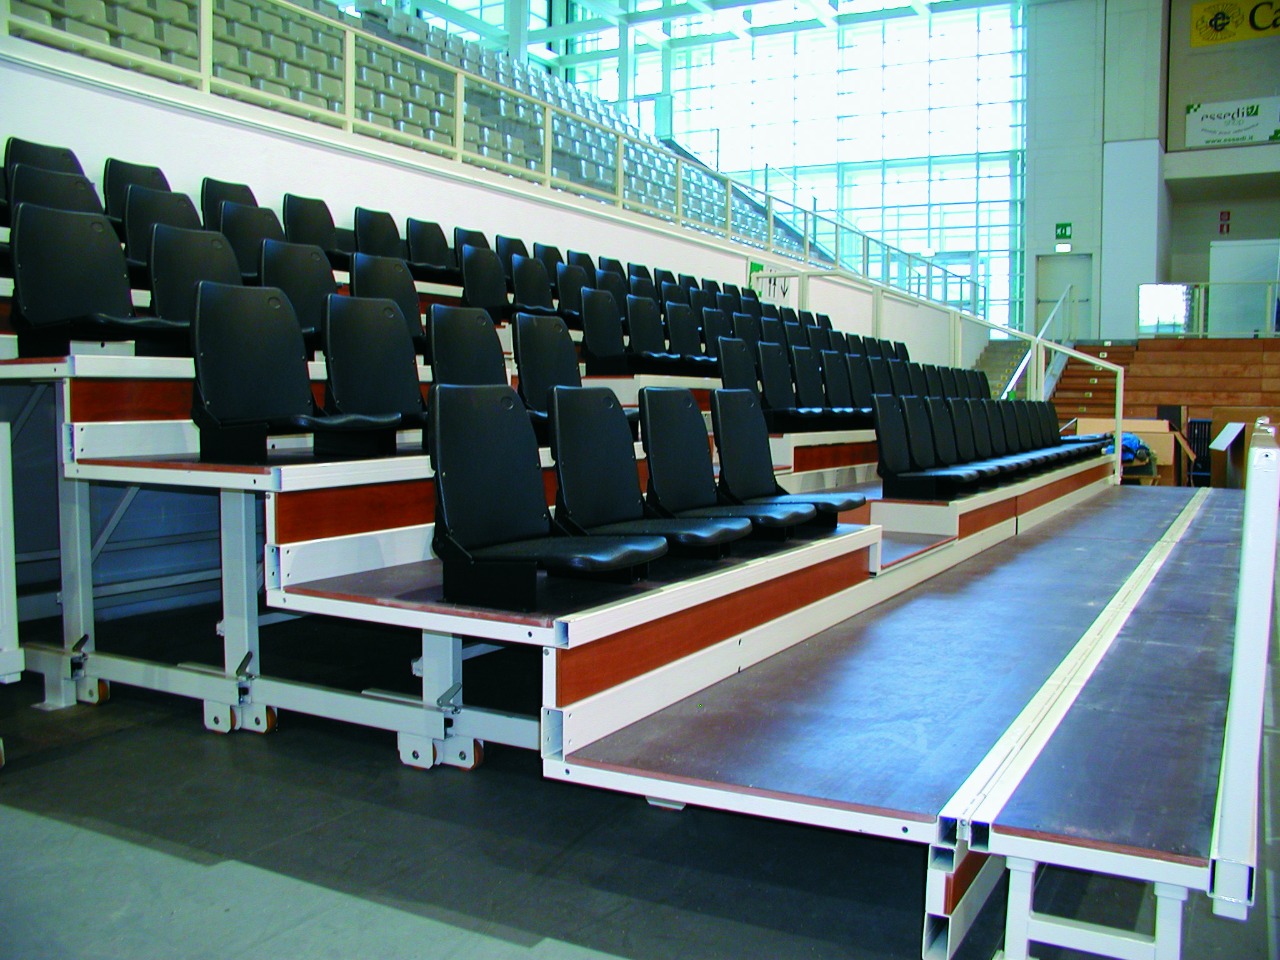 Gallery foto n.6 Telescopic stands - BLM Group Arena 